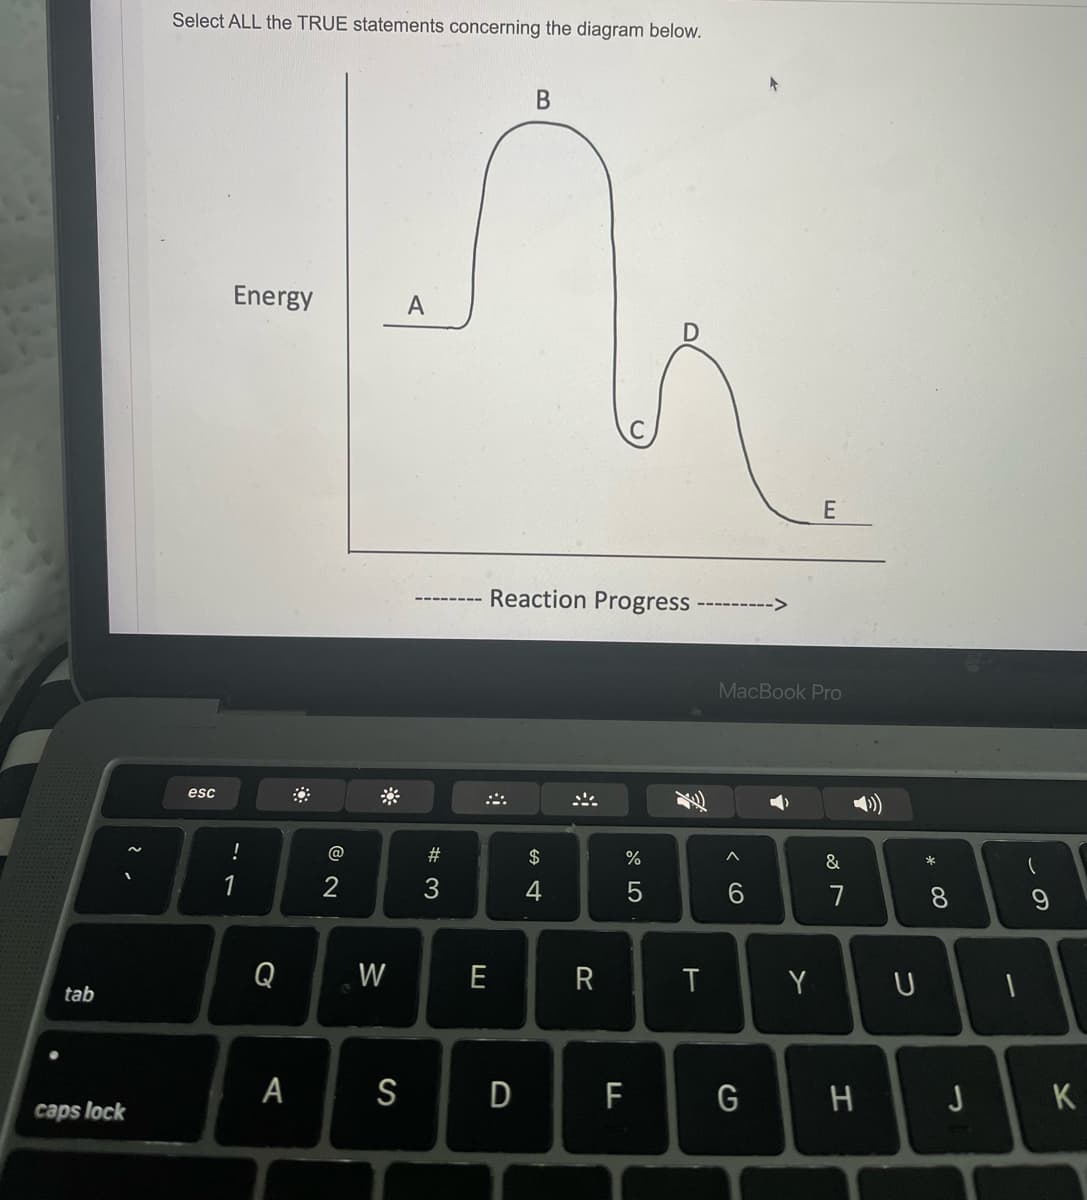 Select ALL the TRUE statements concerning the diagram below.
Energy
A
E
Reaction Progress
MacBook Pro
esc
!
@
#
2$
%
&
1
6.
7
8.
Q
W
E
T
Y
tab
S
D
F
G
っ
K
caps lock
この
つ
エ
B.
A st
A
